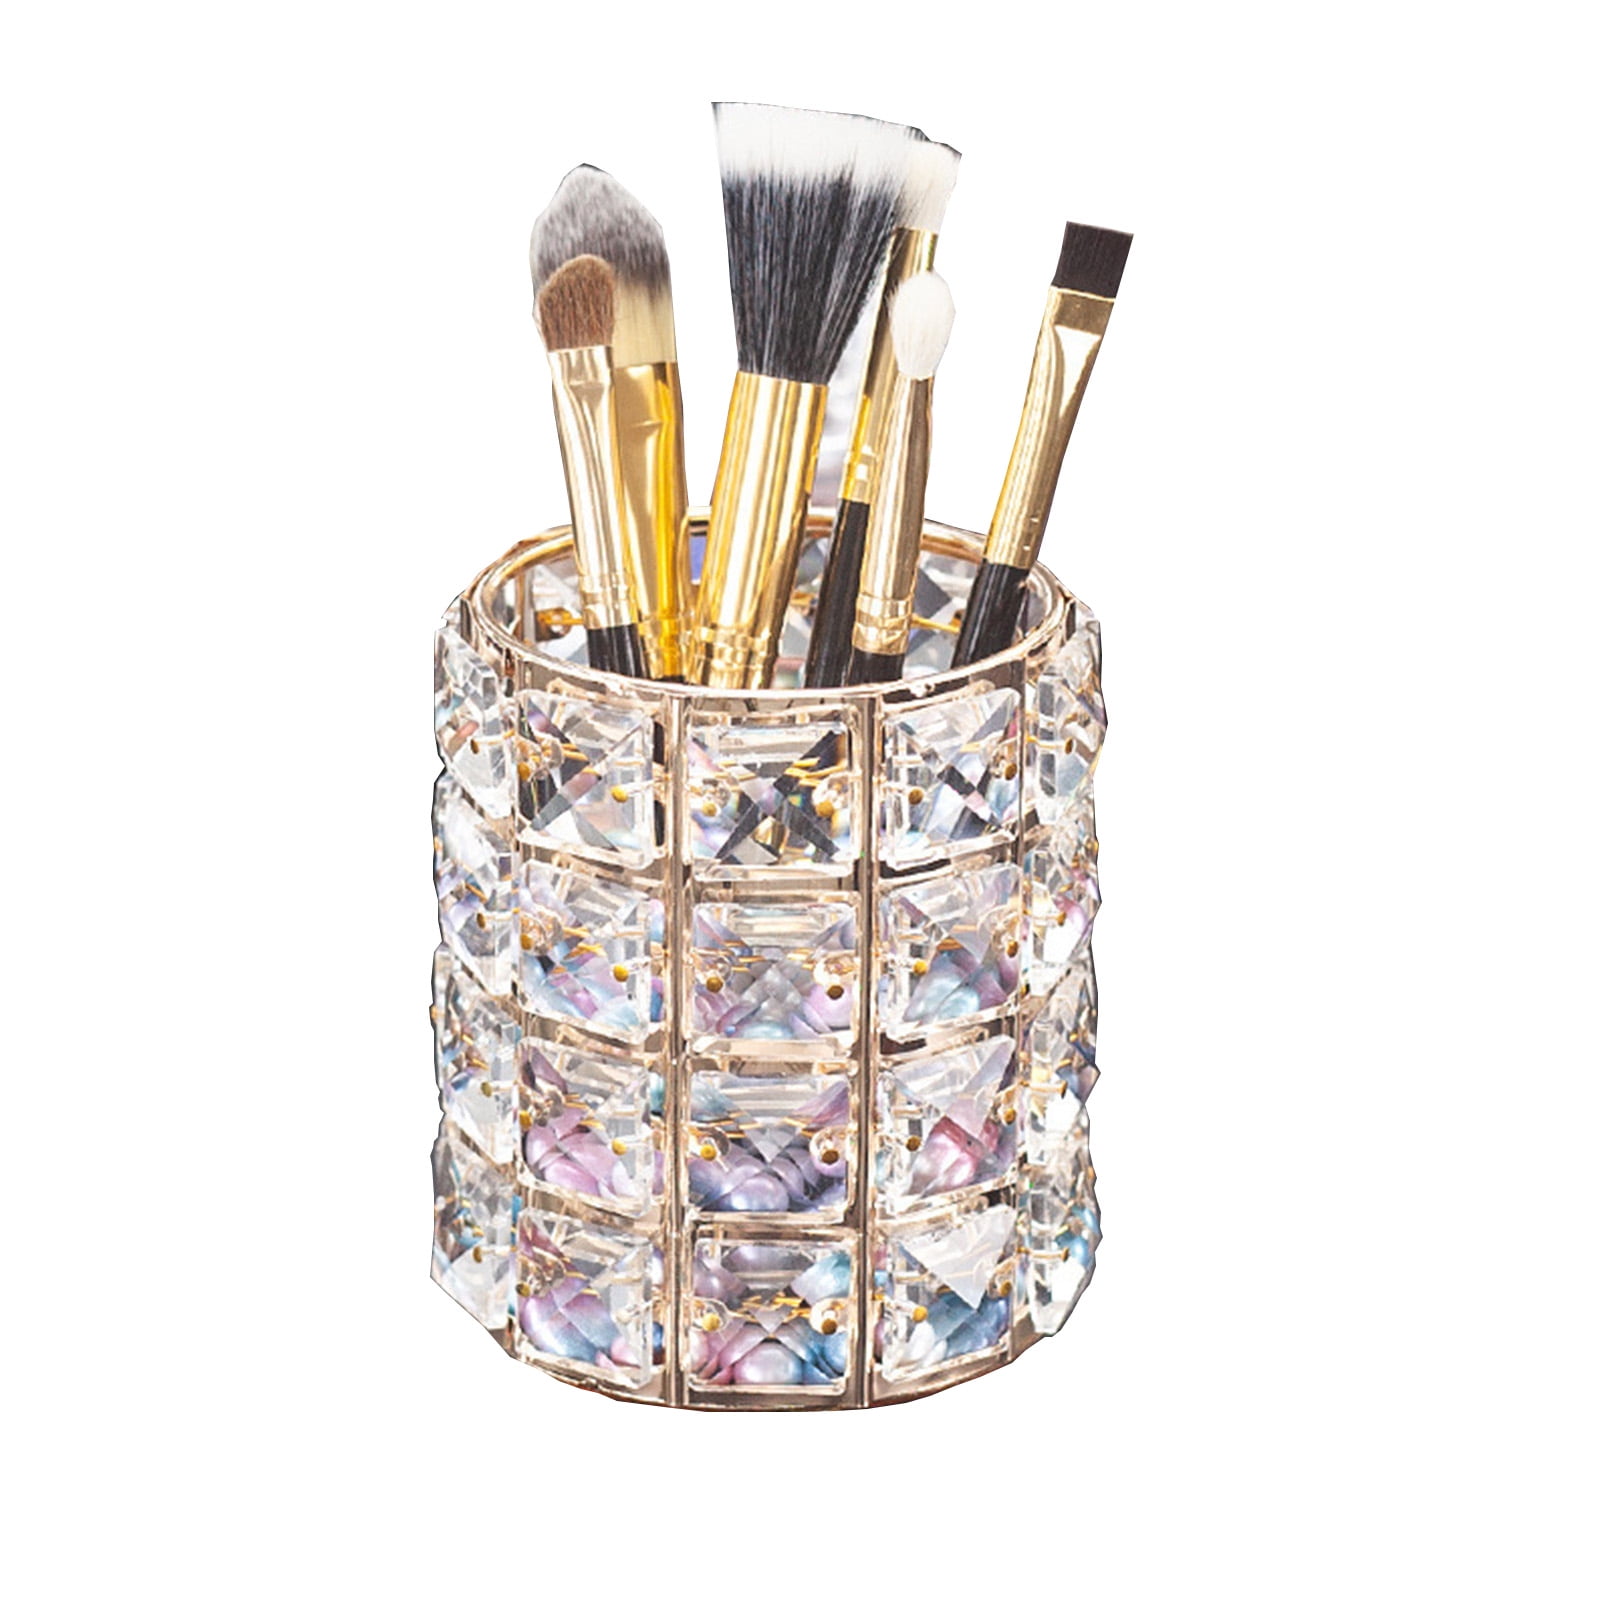 Holder for makeup brushes made with crystal beads